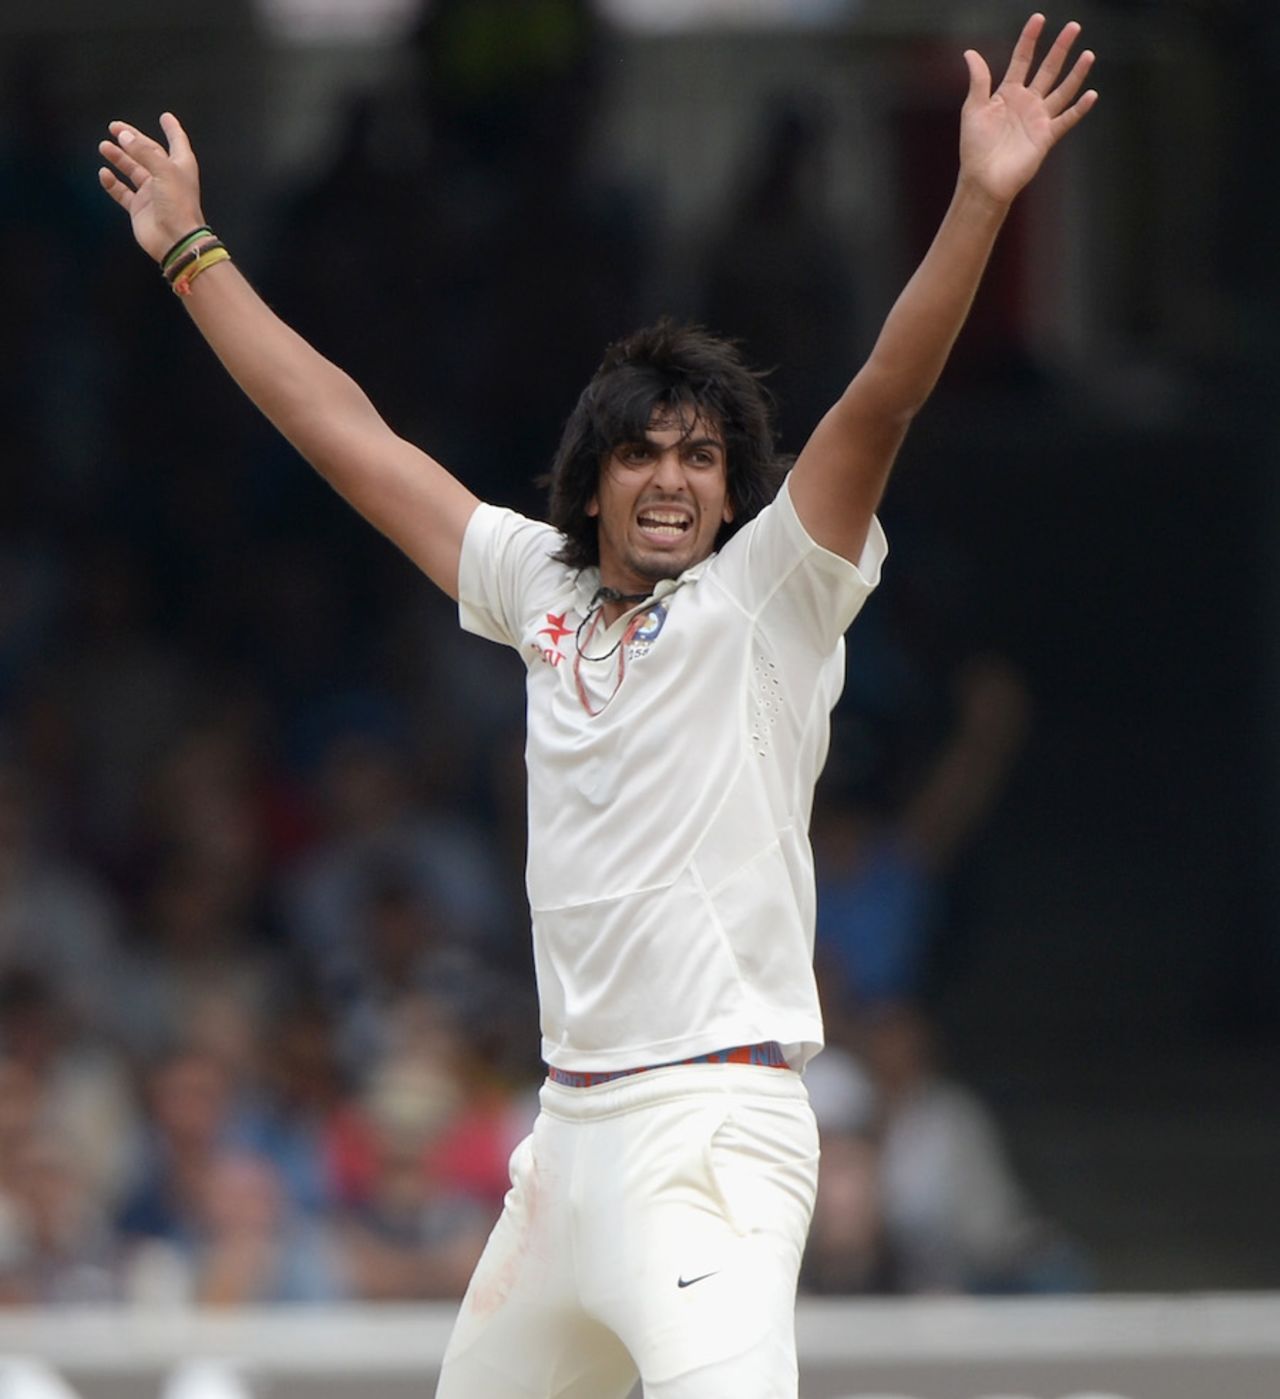 Ishant Sharma registered his best bowling figures of 7 for 74, England v India, 2nd Investec Test, Lord's, 5th day, July 21, 2014